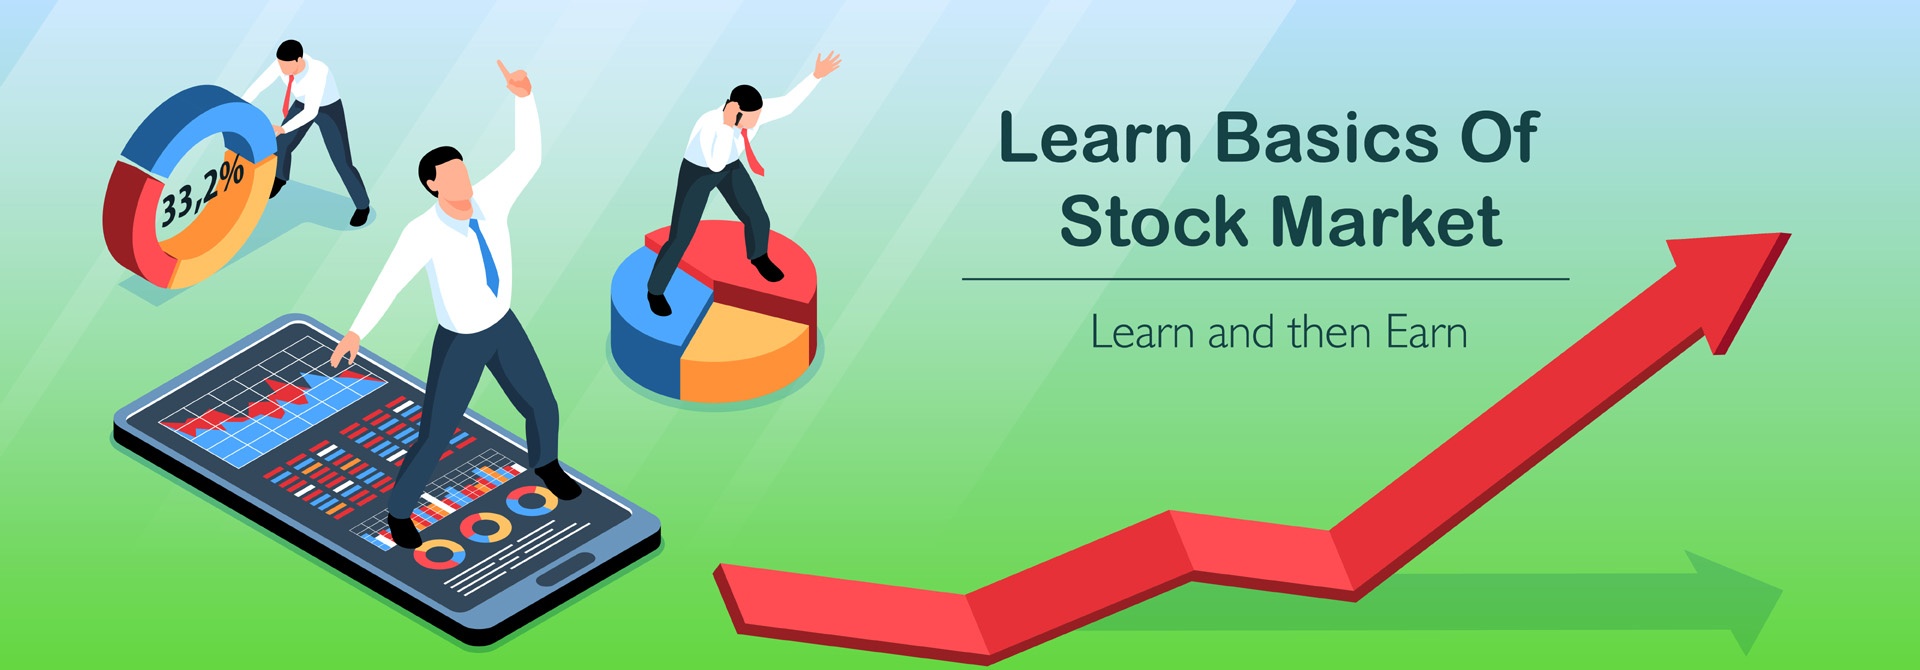 Stock Market Courses, Share Trading Institutes in Jaipur - True Shot Traders